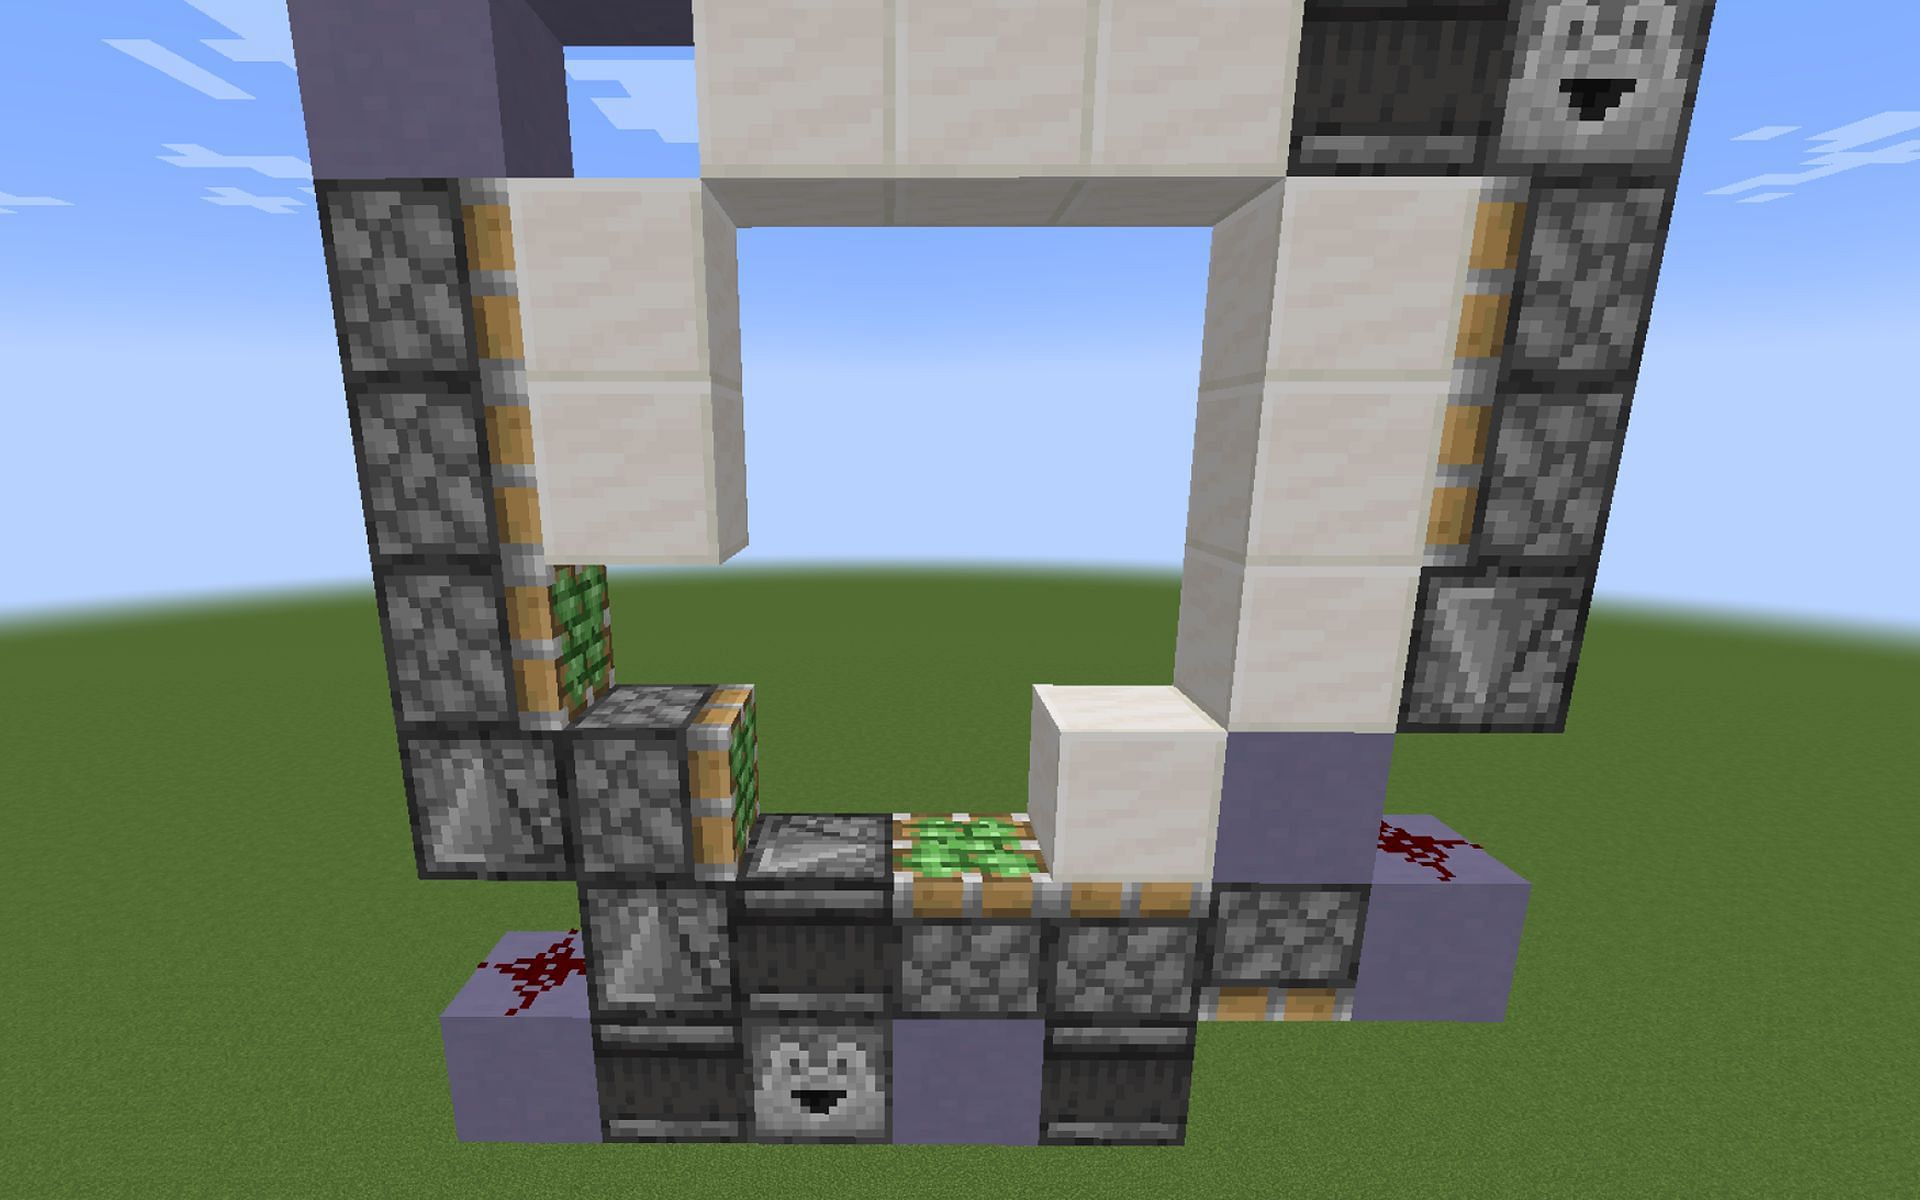 Players will need to destroy and replant several blocks from their build&#039;s frame. (Image via Minecraft)